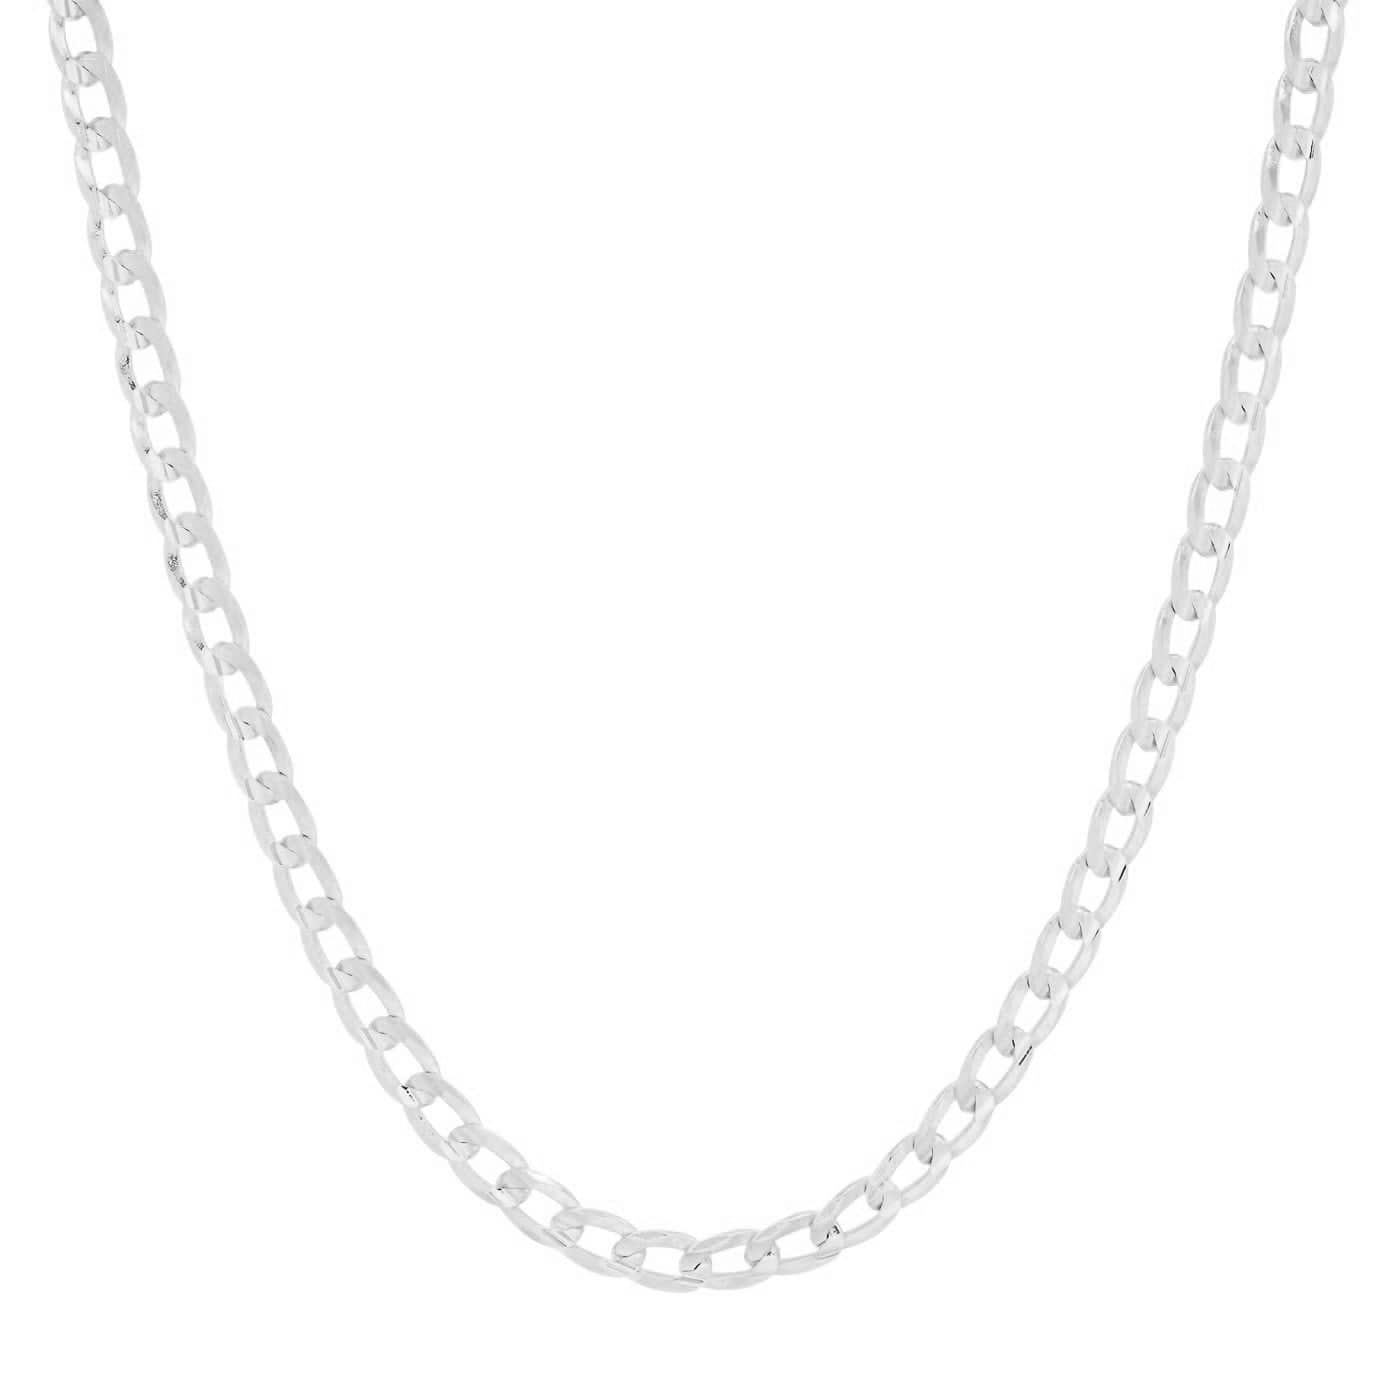 TAI JEWELRY Necklace Sterling Silver Chain Necklace